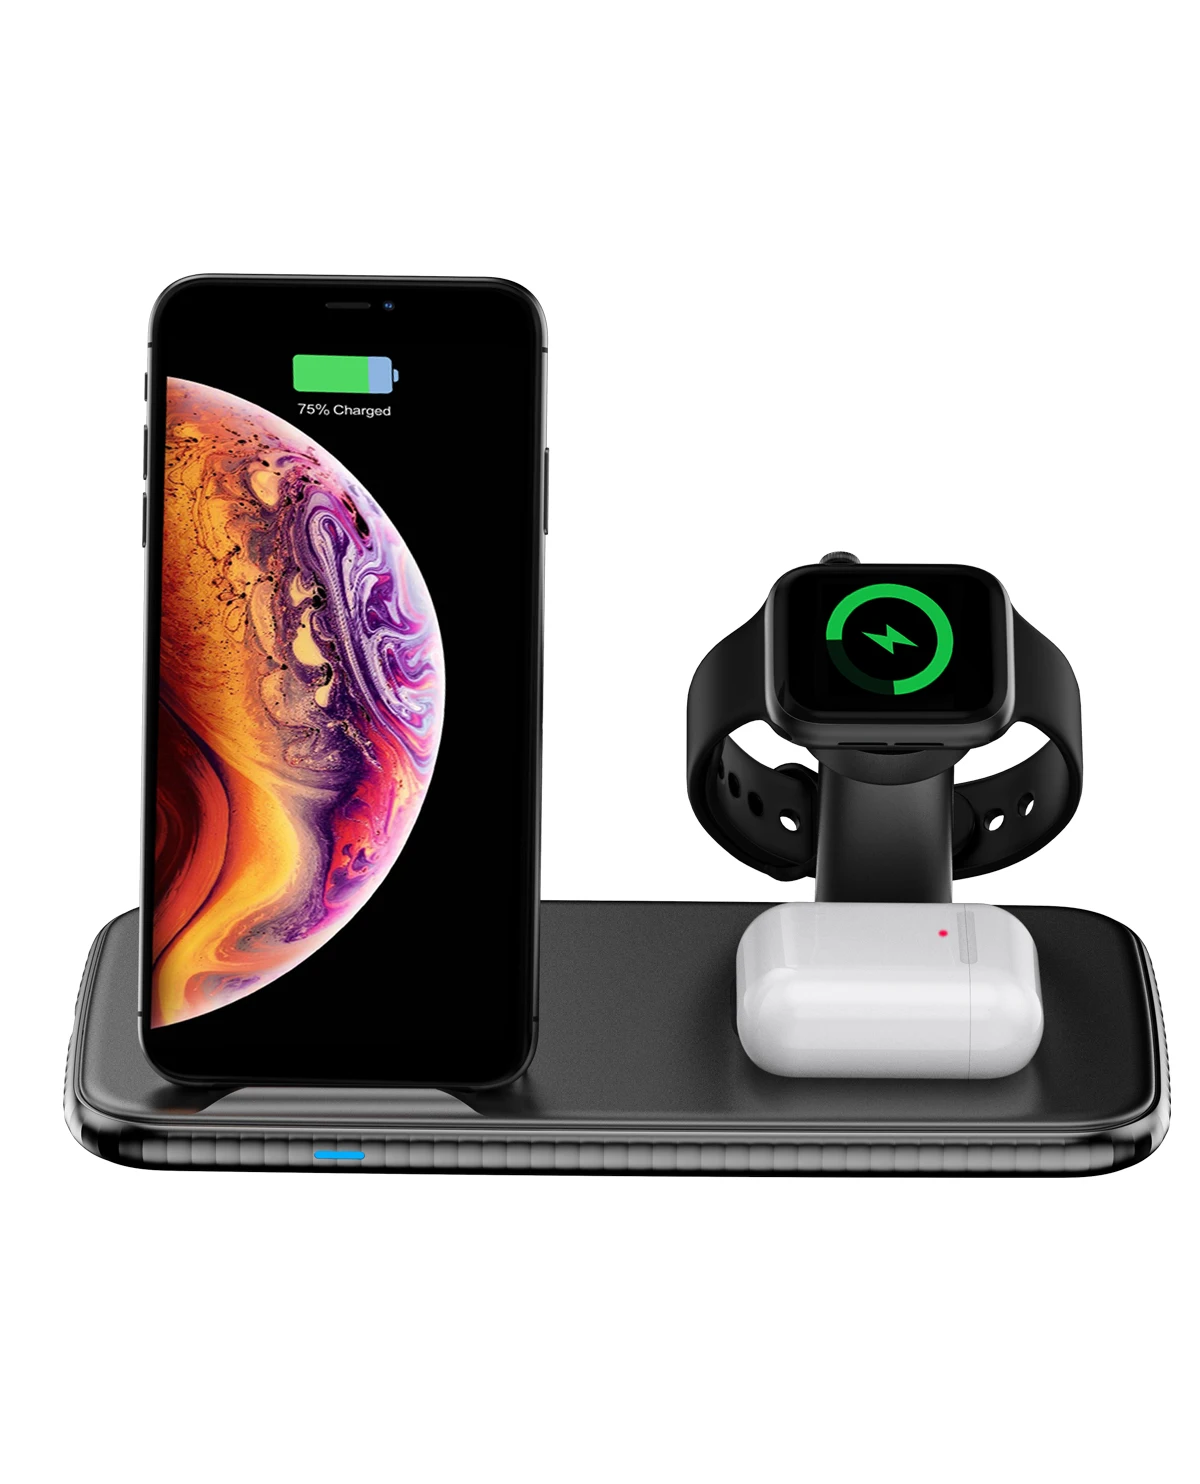 

15W Qi Fast Wireless Charger Stand For iPhone 11 XR X 8 Apple Watch 4 in 1 Foldable Charging Dock Station for Airpods Pro iWatch, Black/white